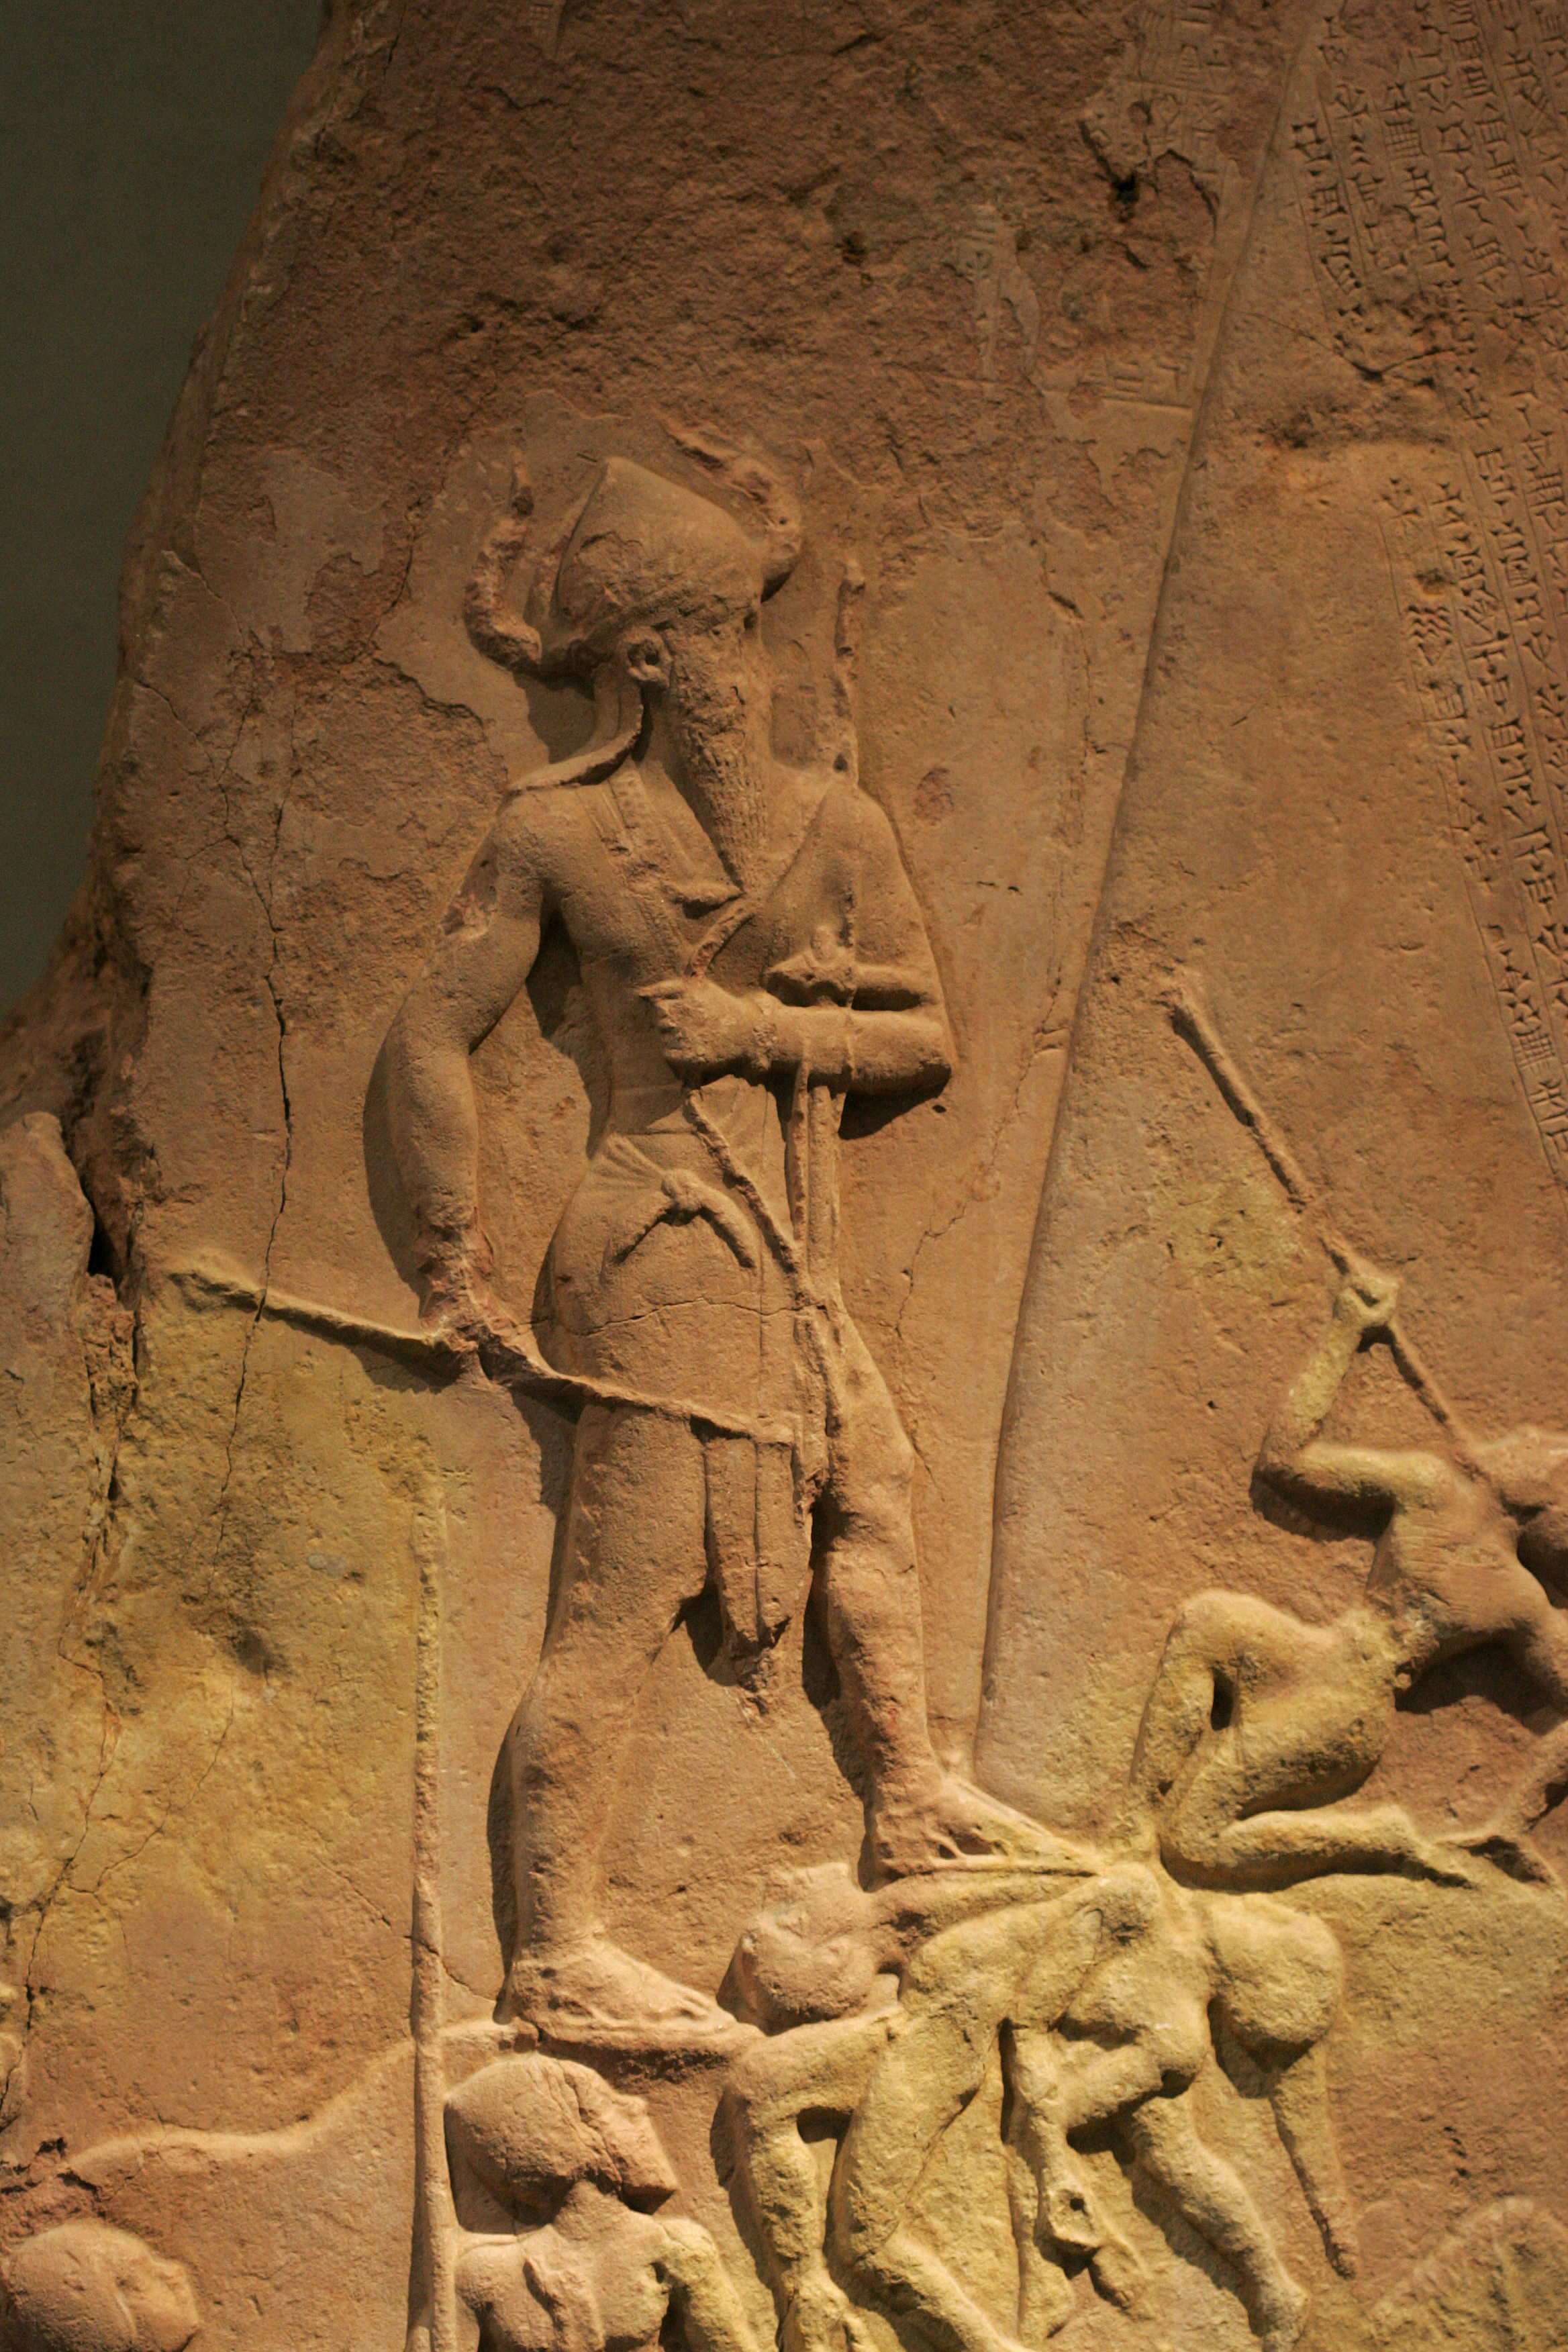 Detail of bas relief sculpture showing Naram-Sin standing on defeated warriors